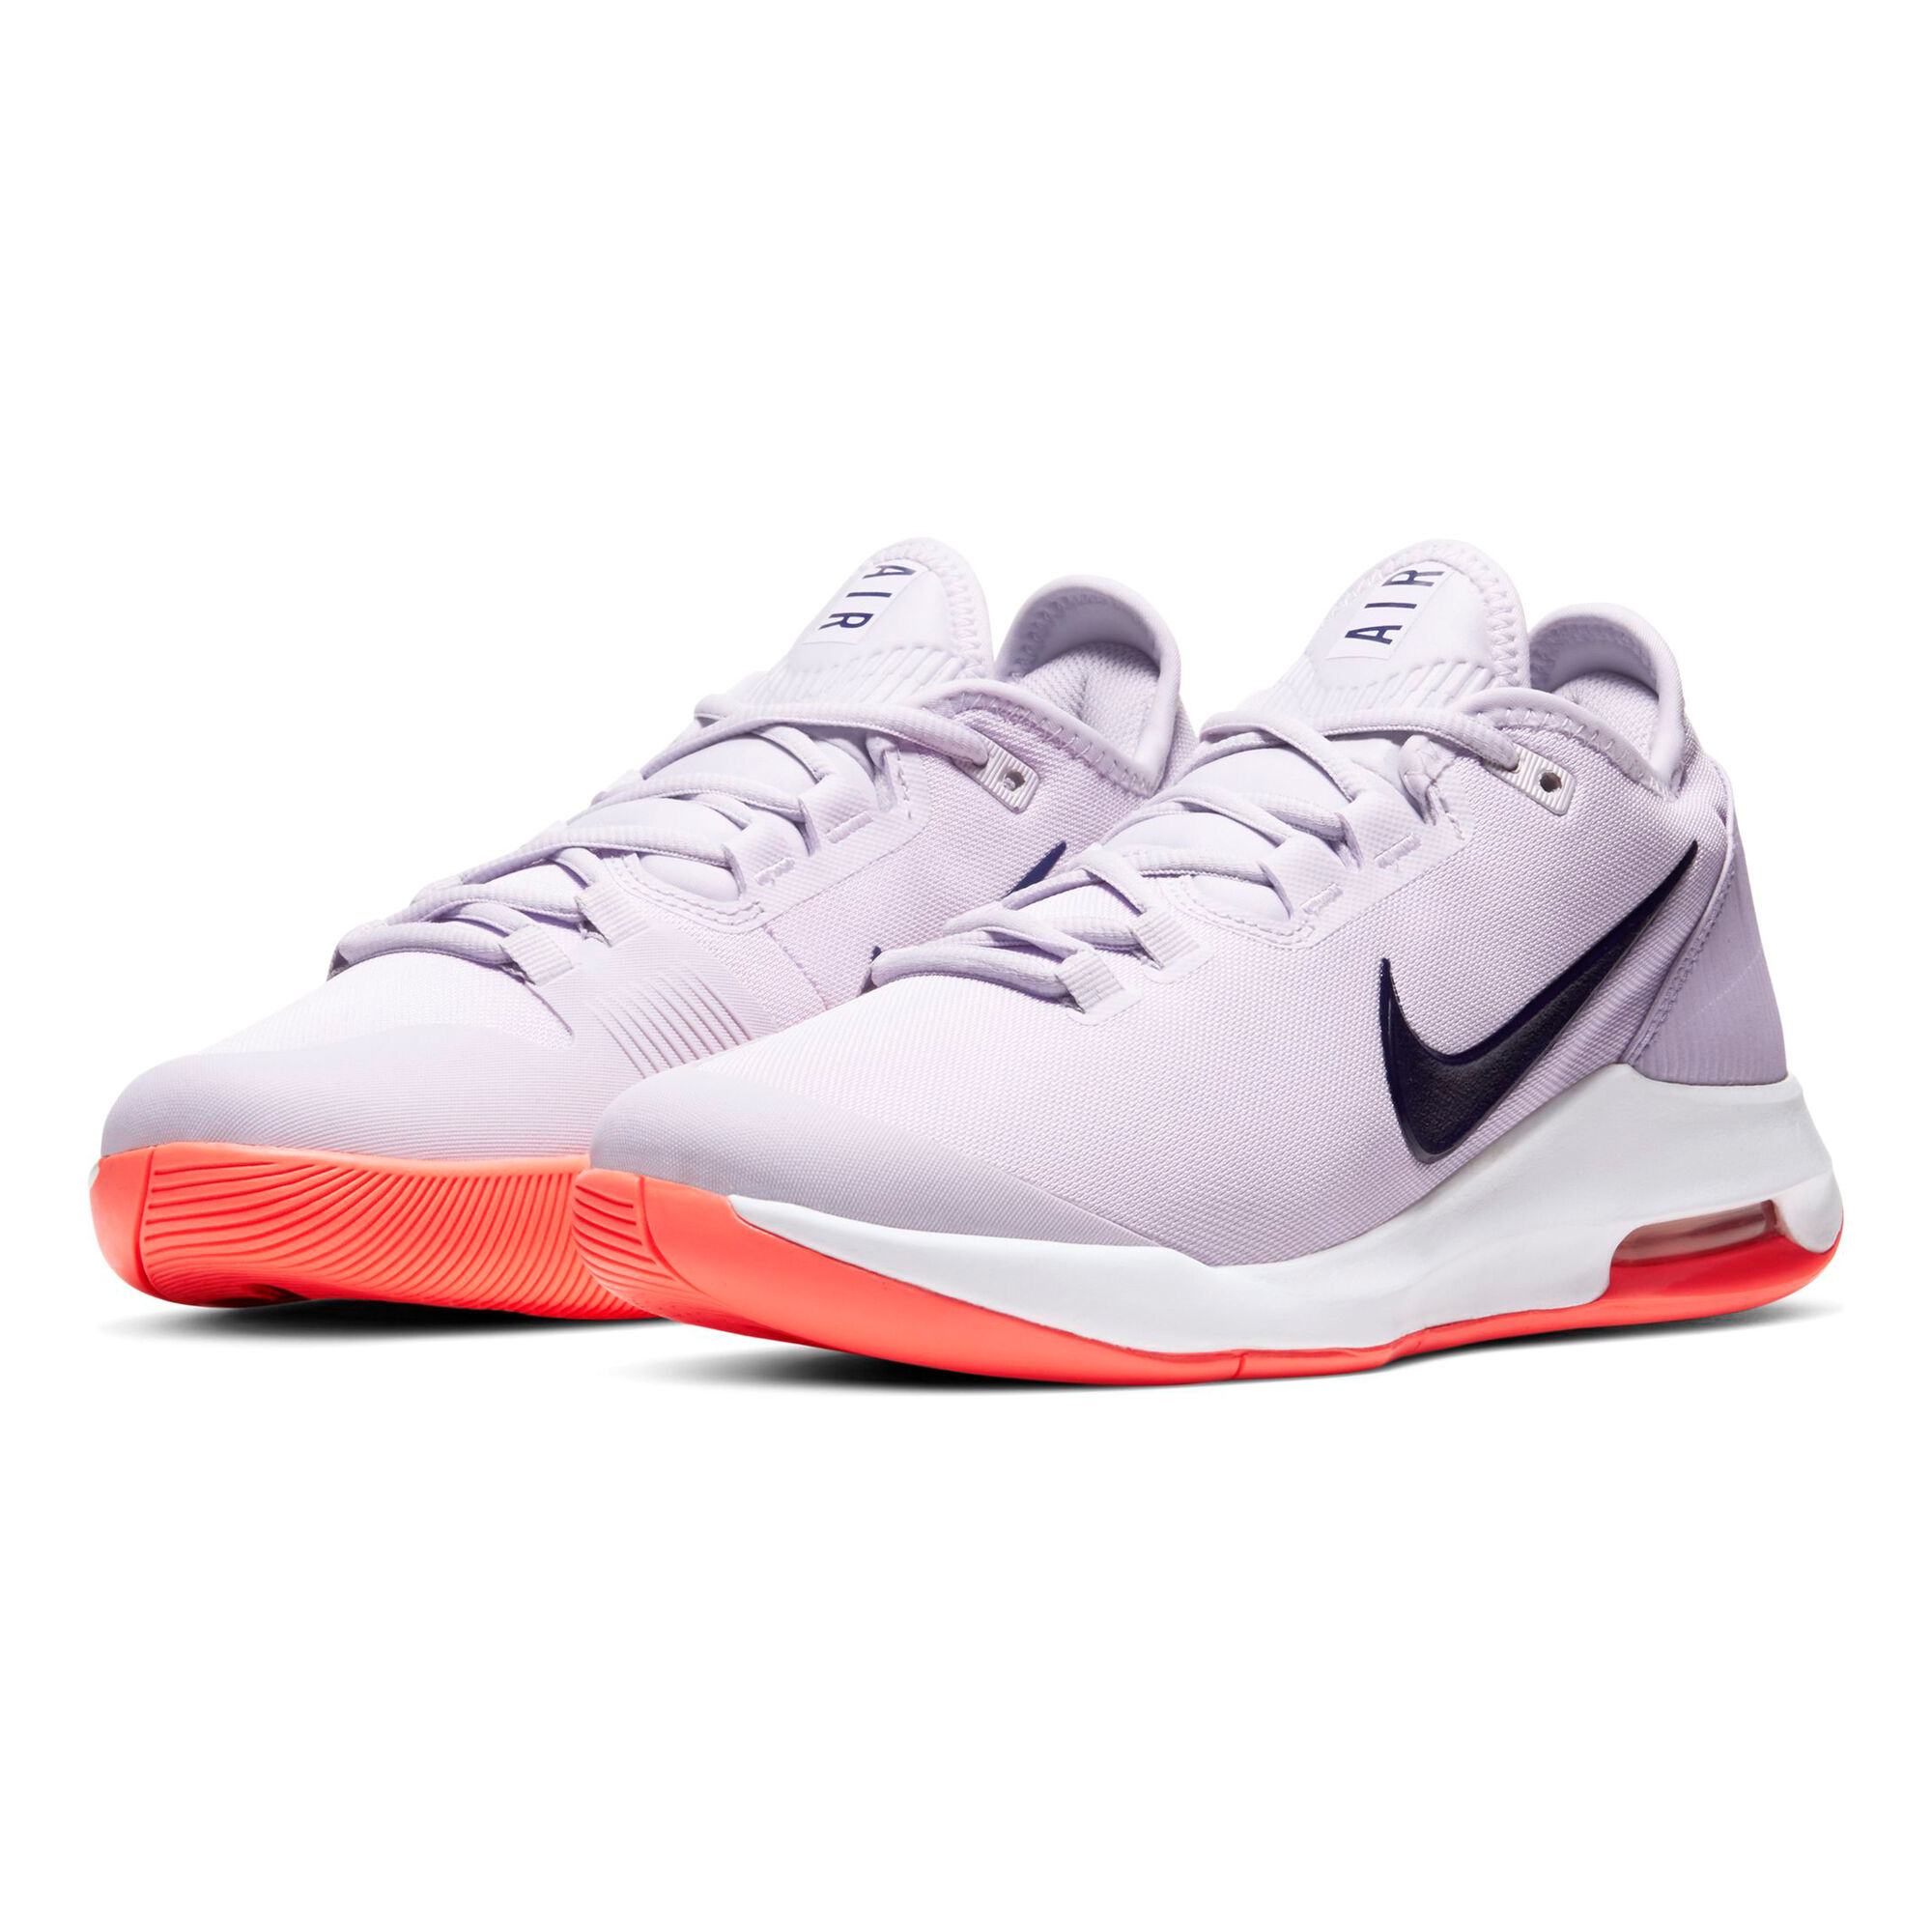 Buy Nike Air Max Wildcard All Court Shoe Women Lilac, White online ...